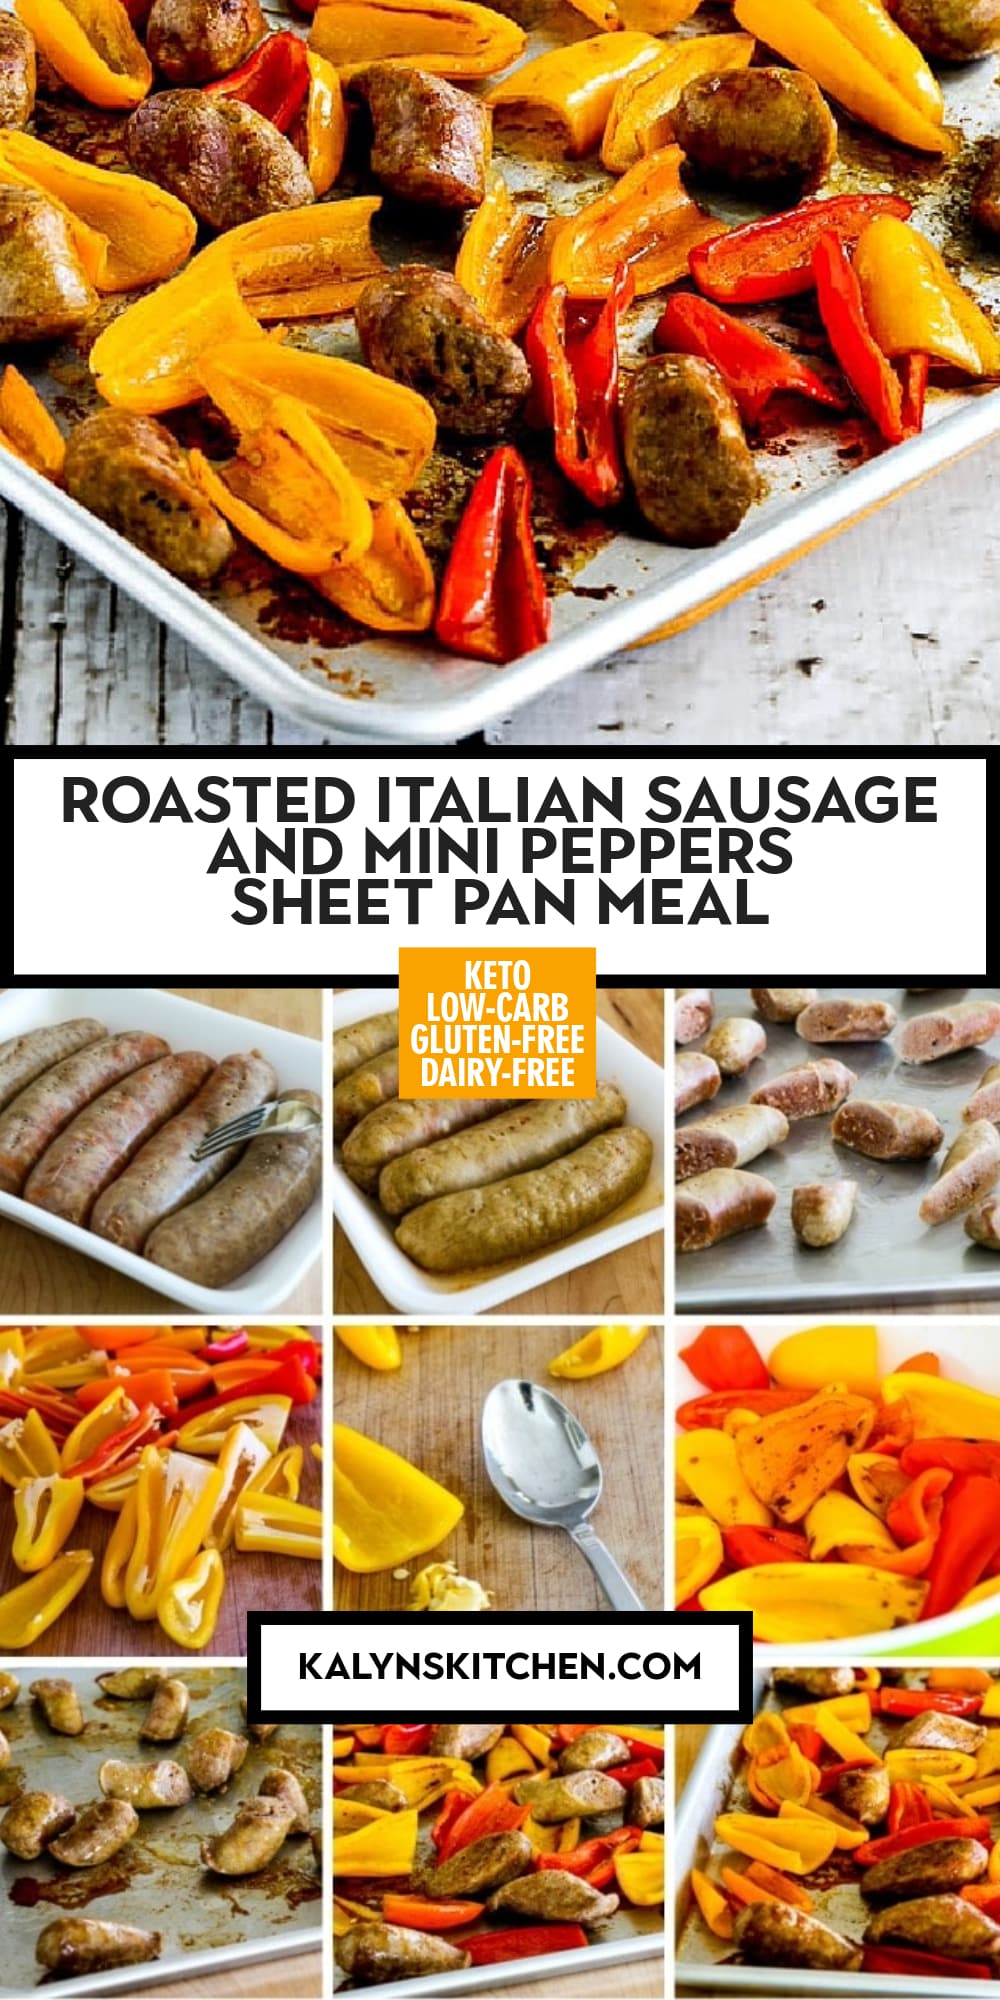 Pinterest image of Roasted Italian Sausage and Mini Peppers Sheet Pan Meal